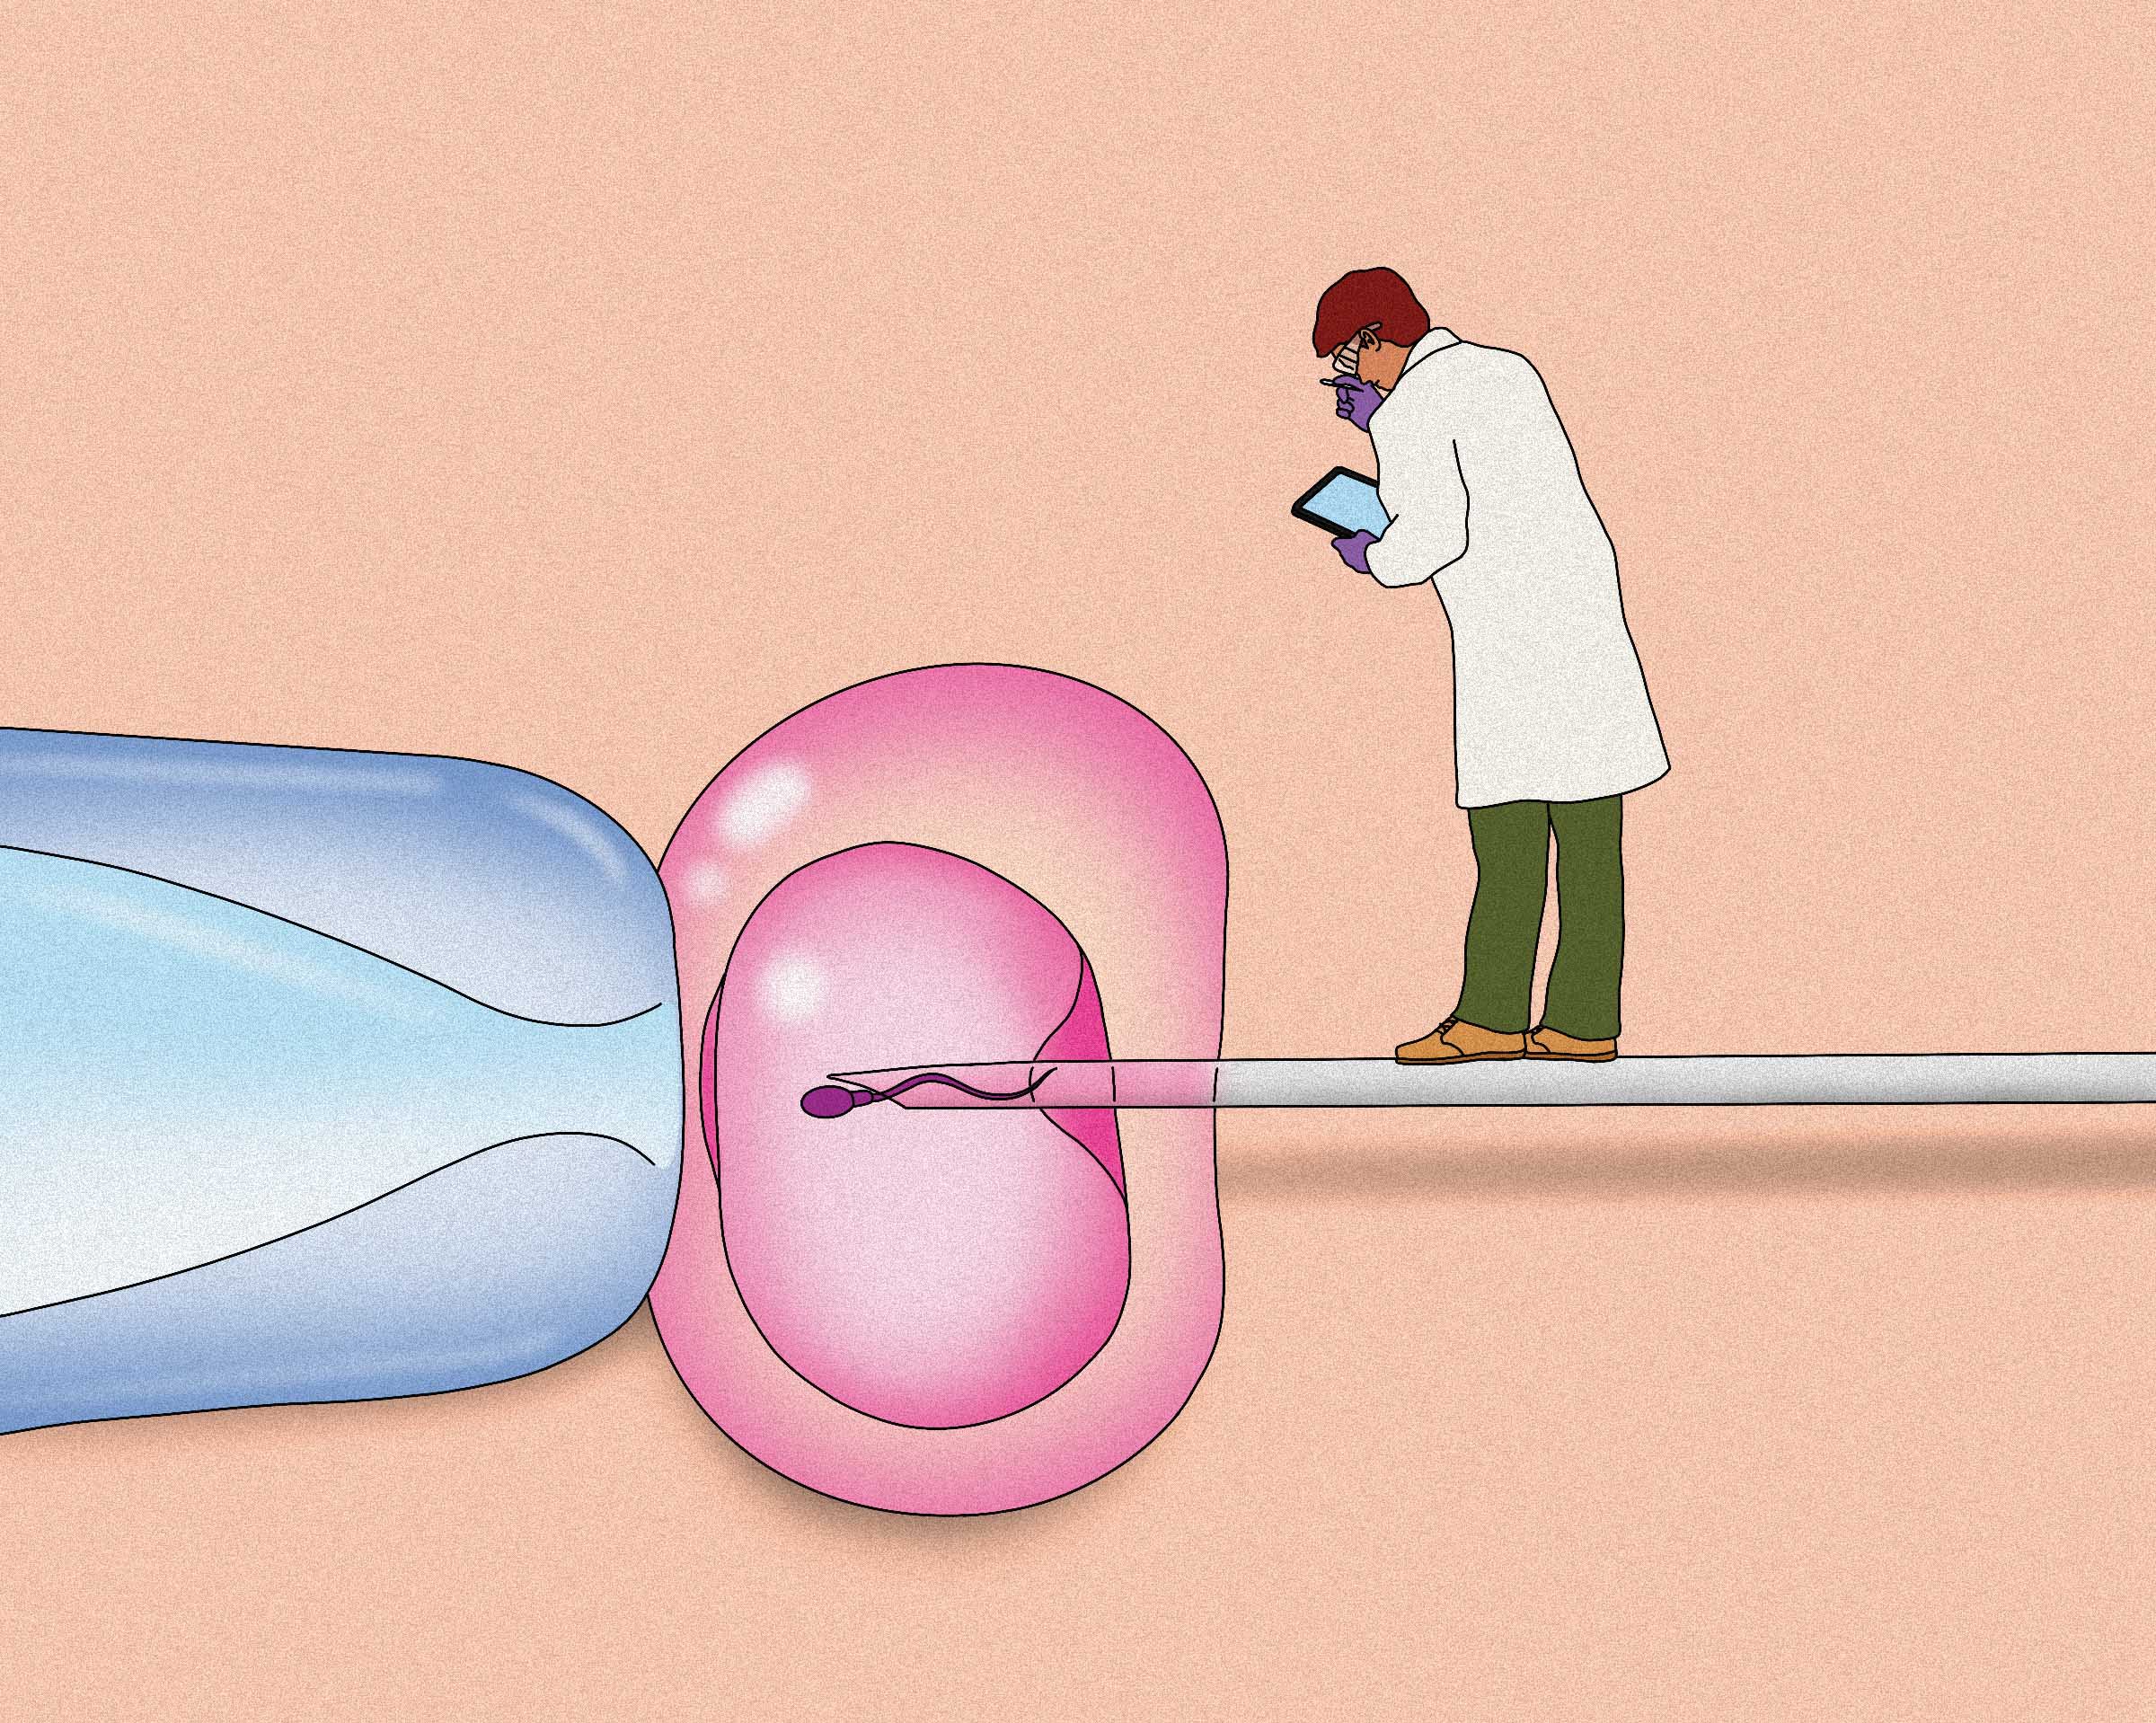 A scientist looking at a tablet and standing on a giant needle that is inserting a sperm into an egg